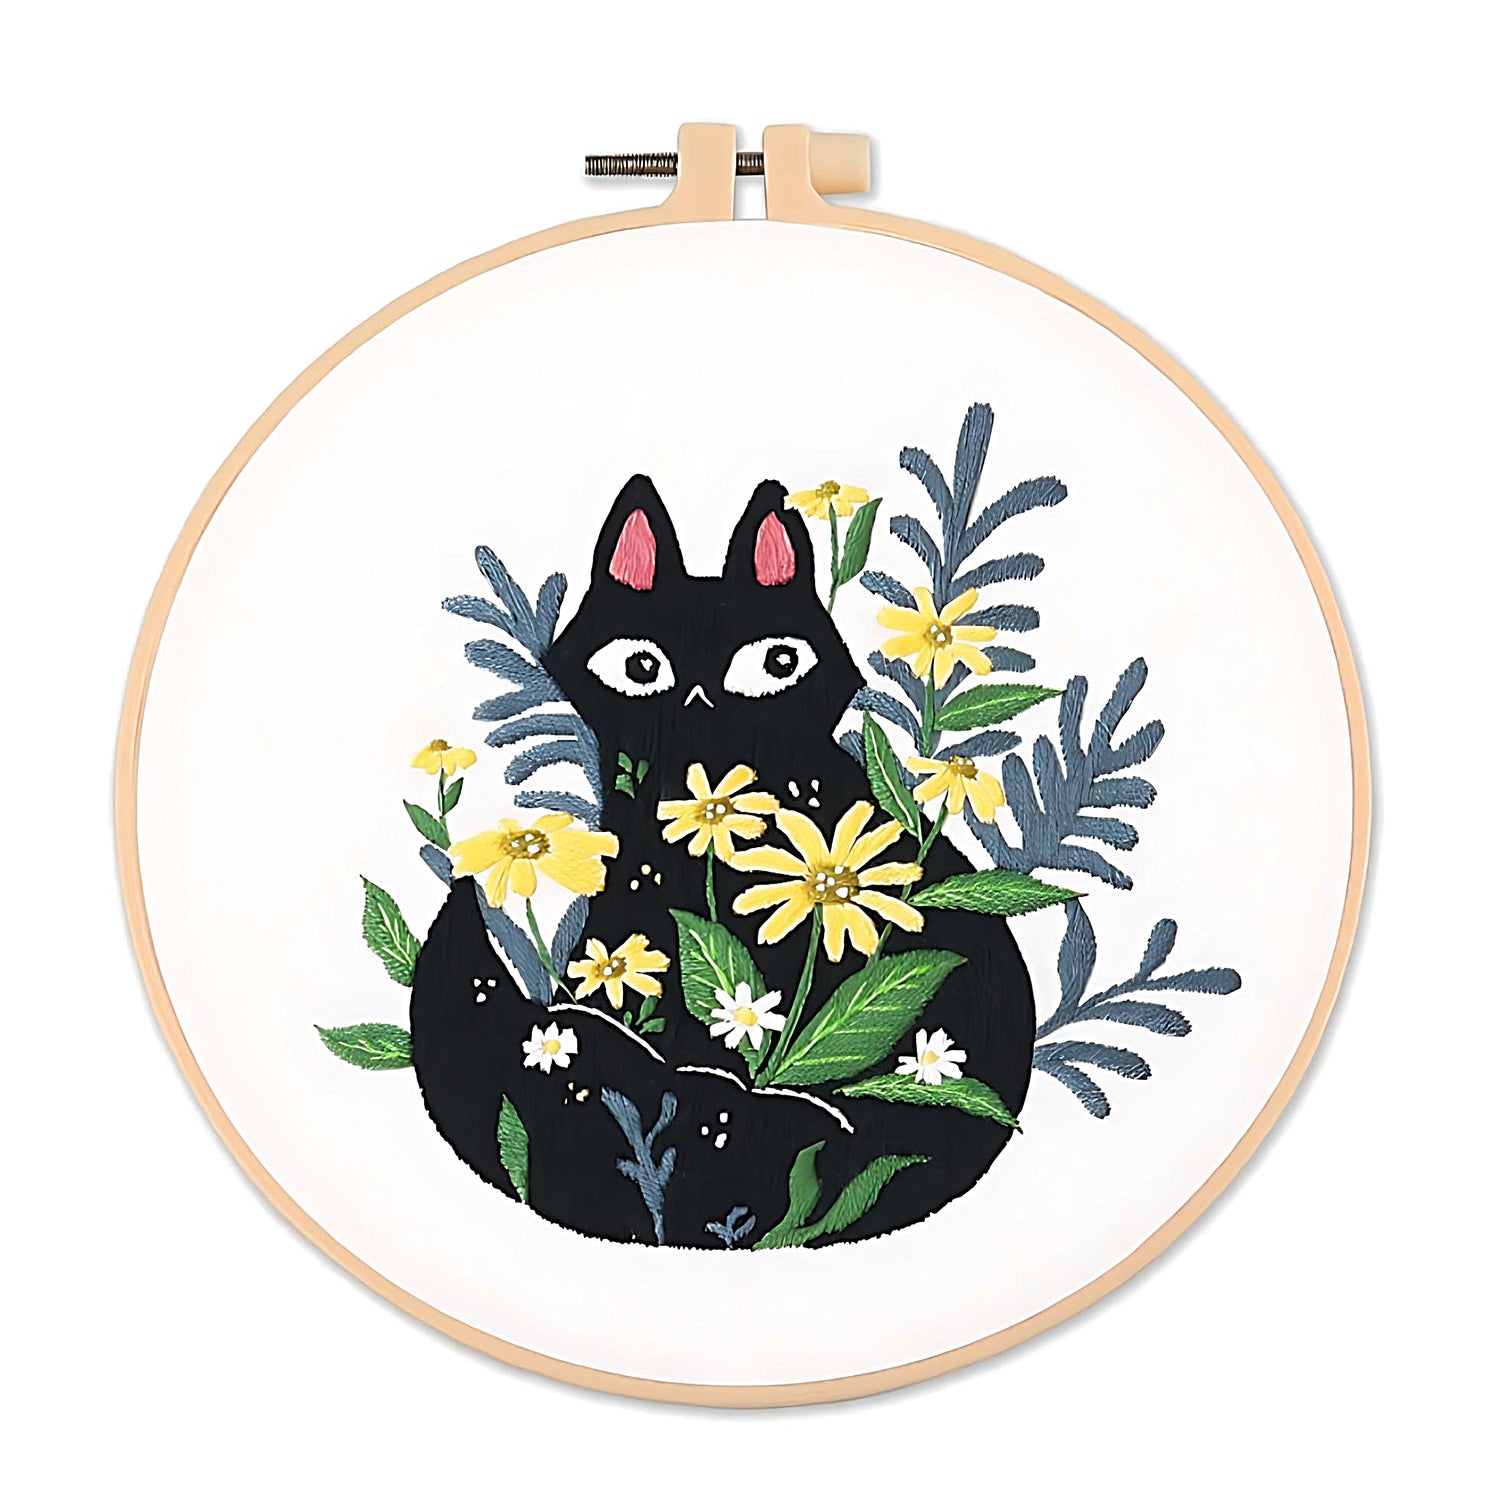 an embroidery of a black cat and some yellow flowers